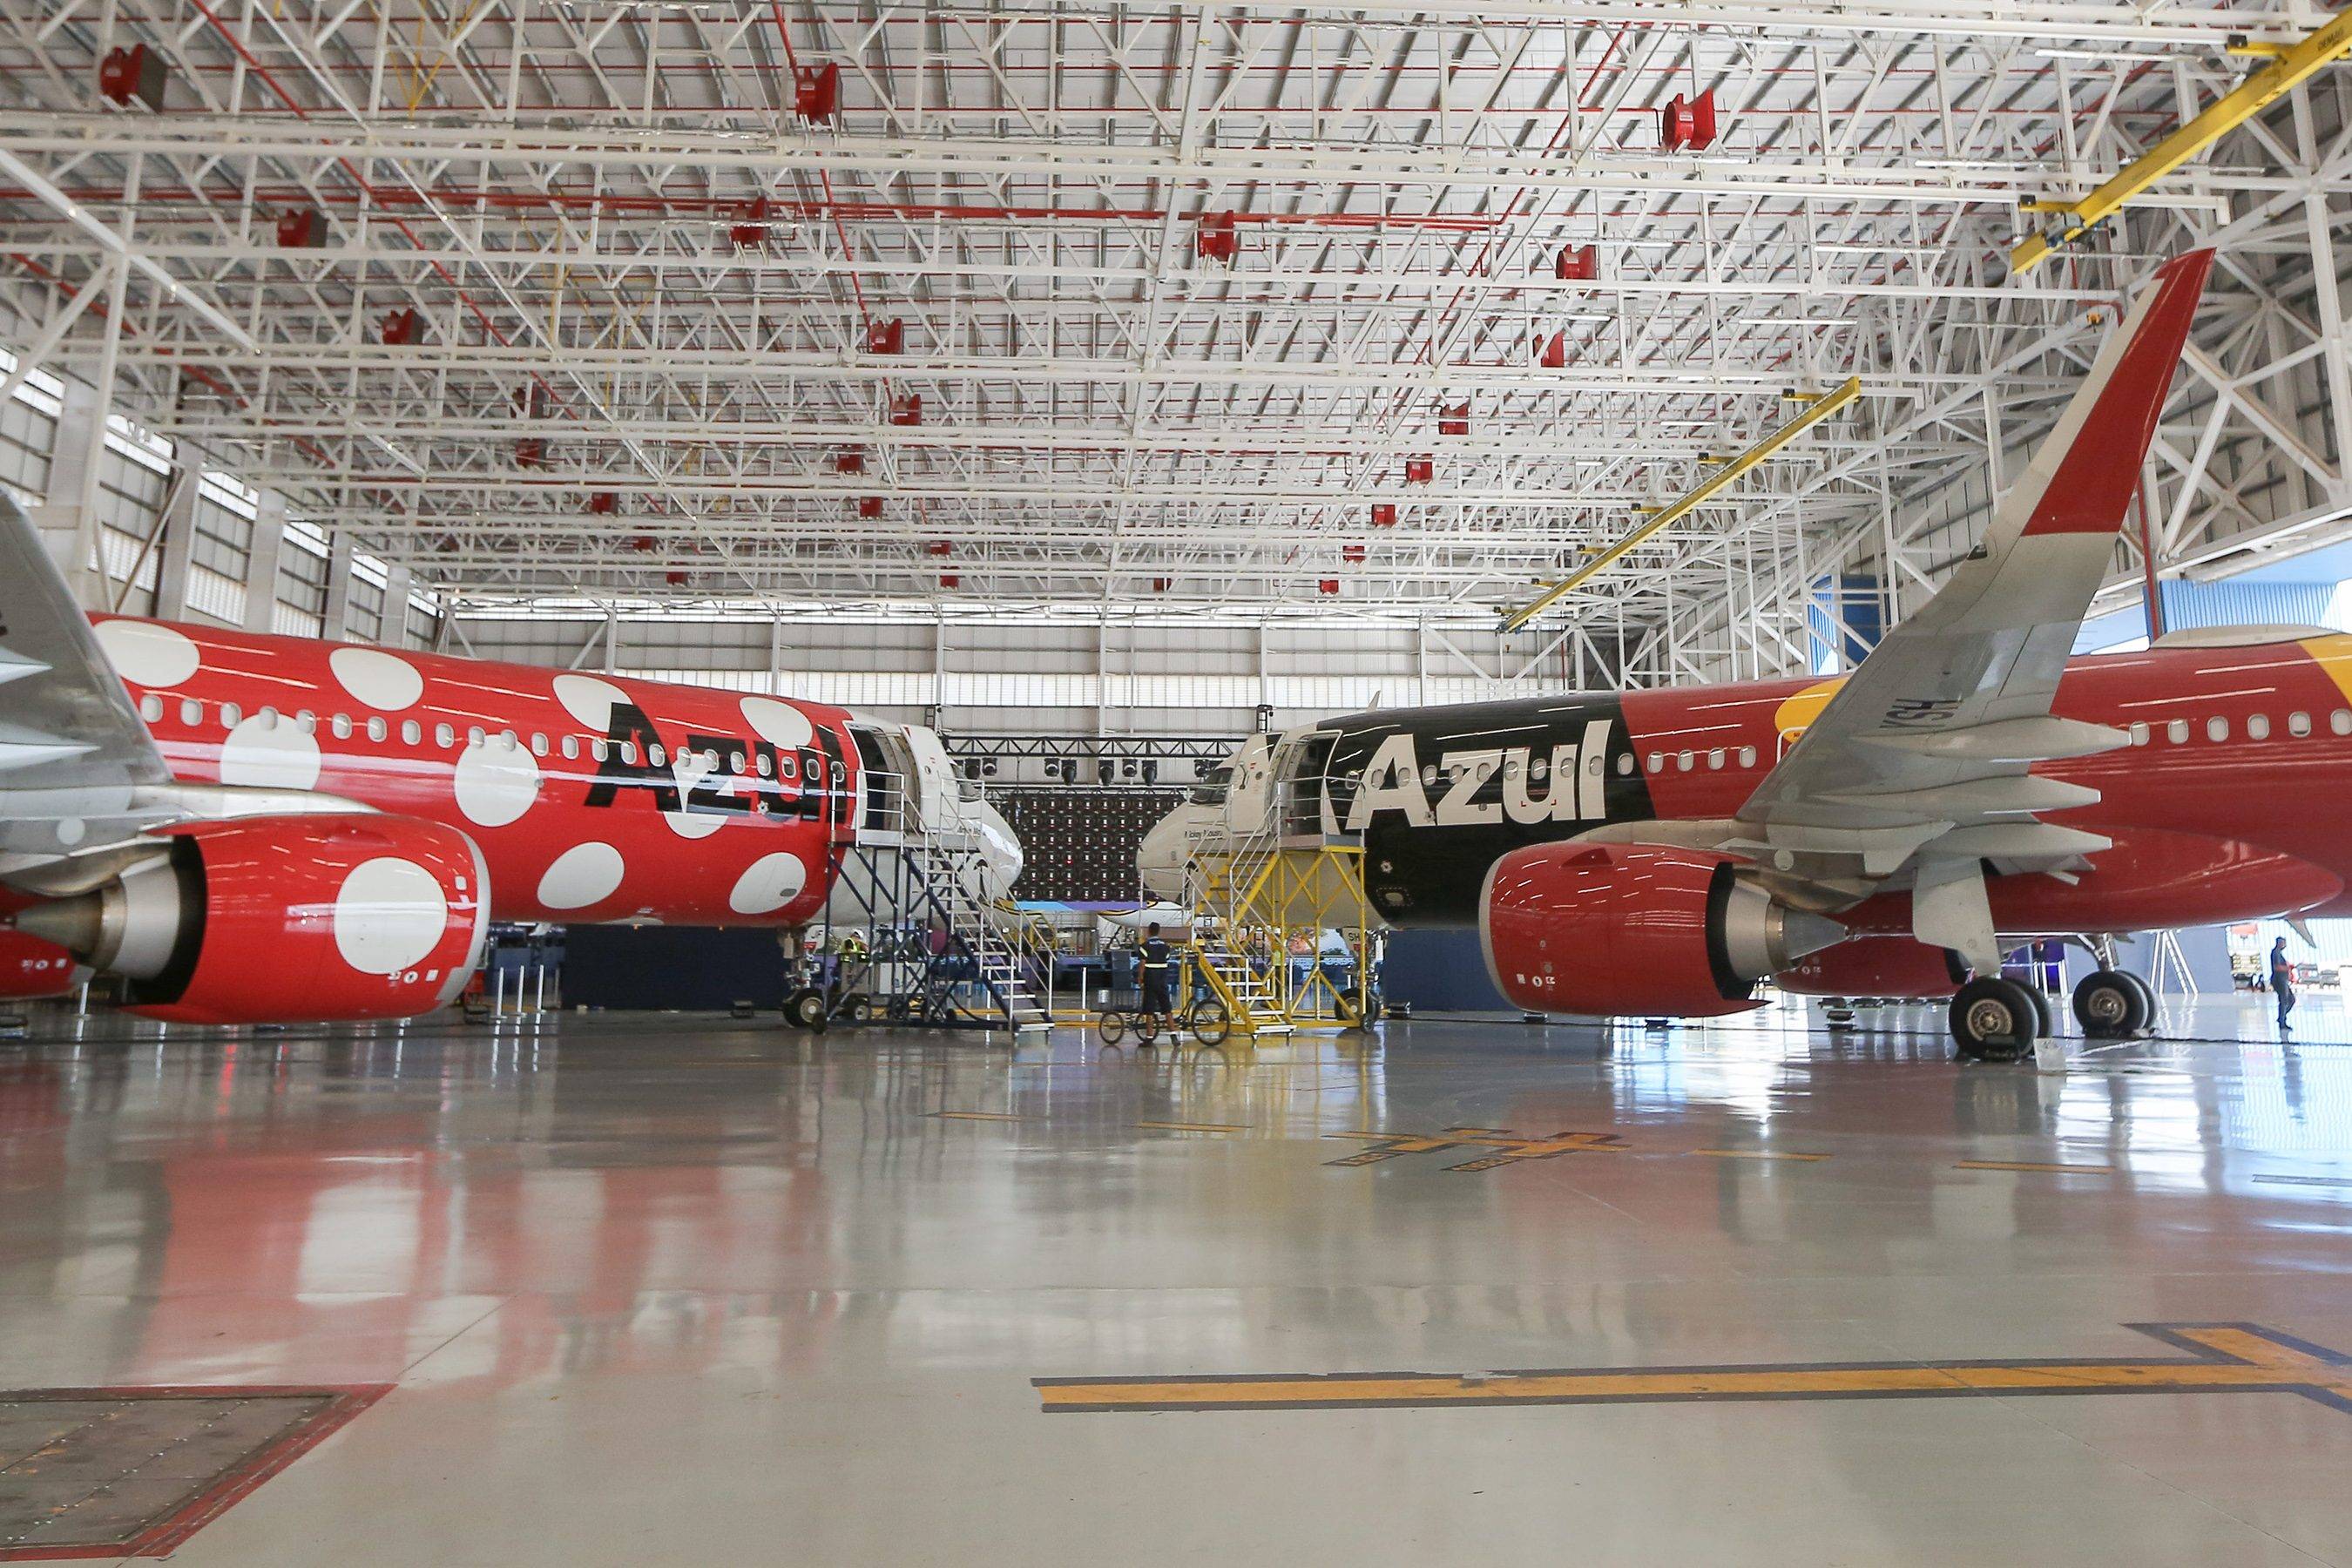 Mickey Mouse and Minnie Mouse-inspired airplanes meet for the first time during an announcement of a fifth Disney-character plane coming to the Azul fleet